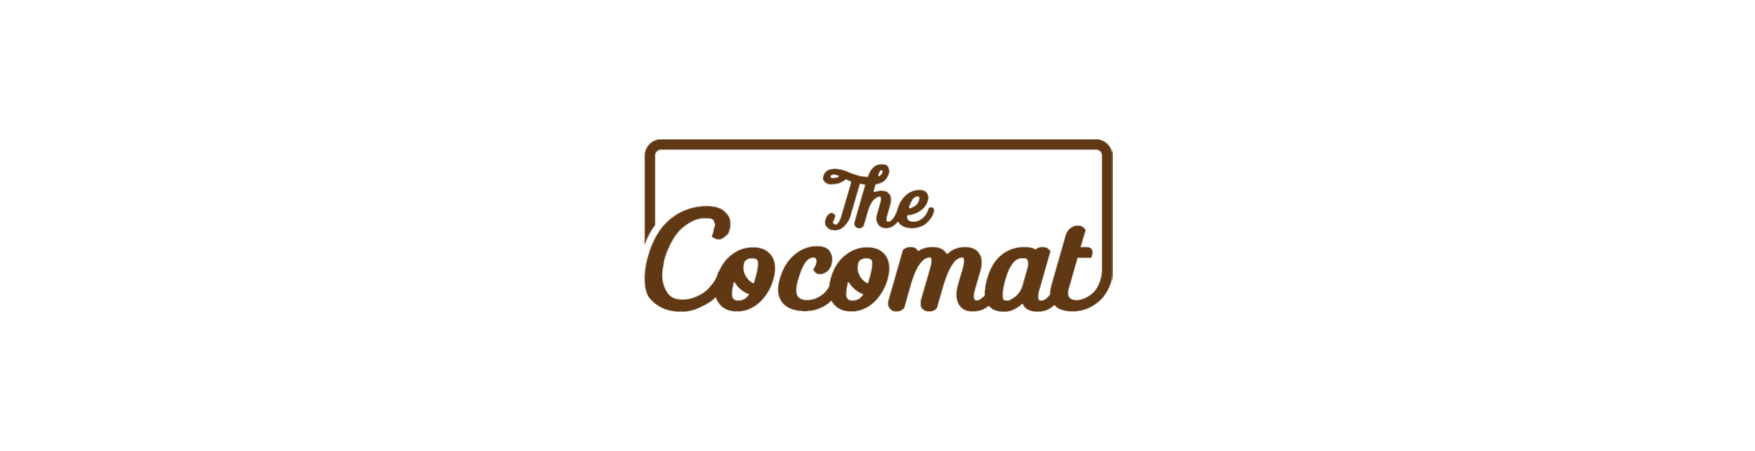 The Cocomat